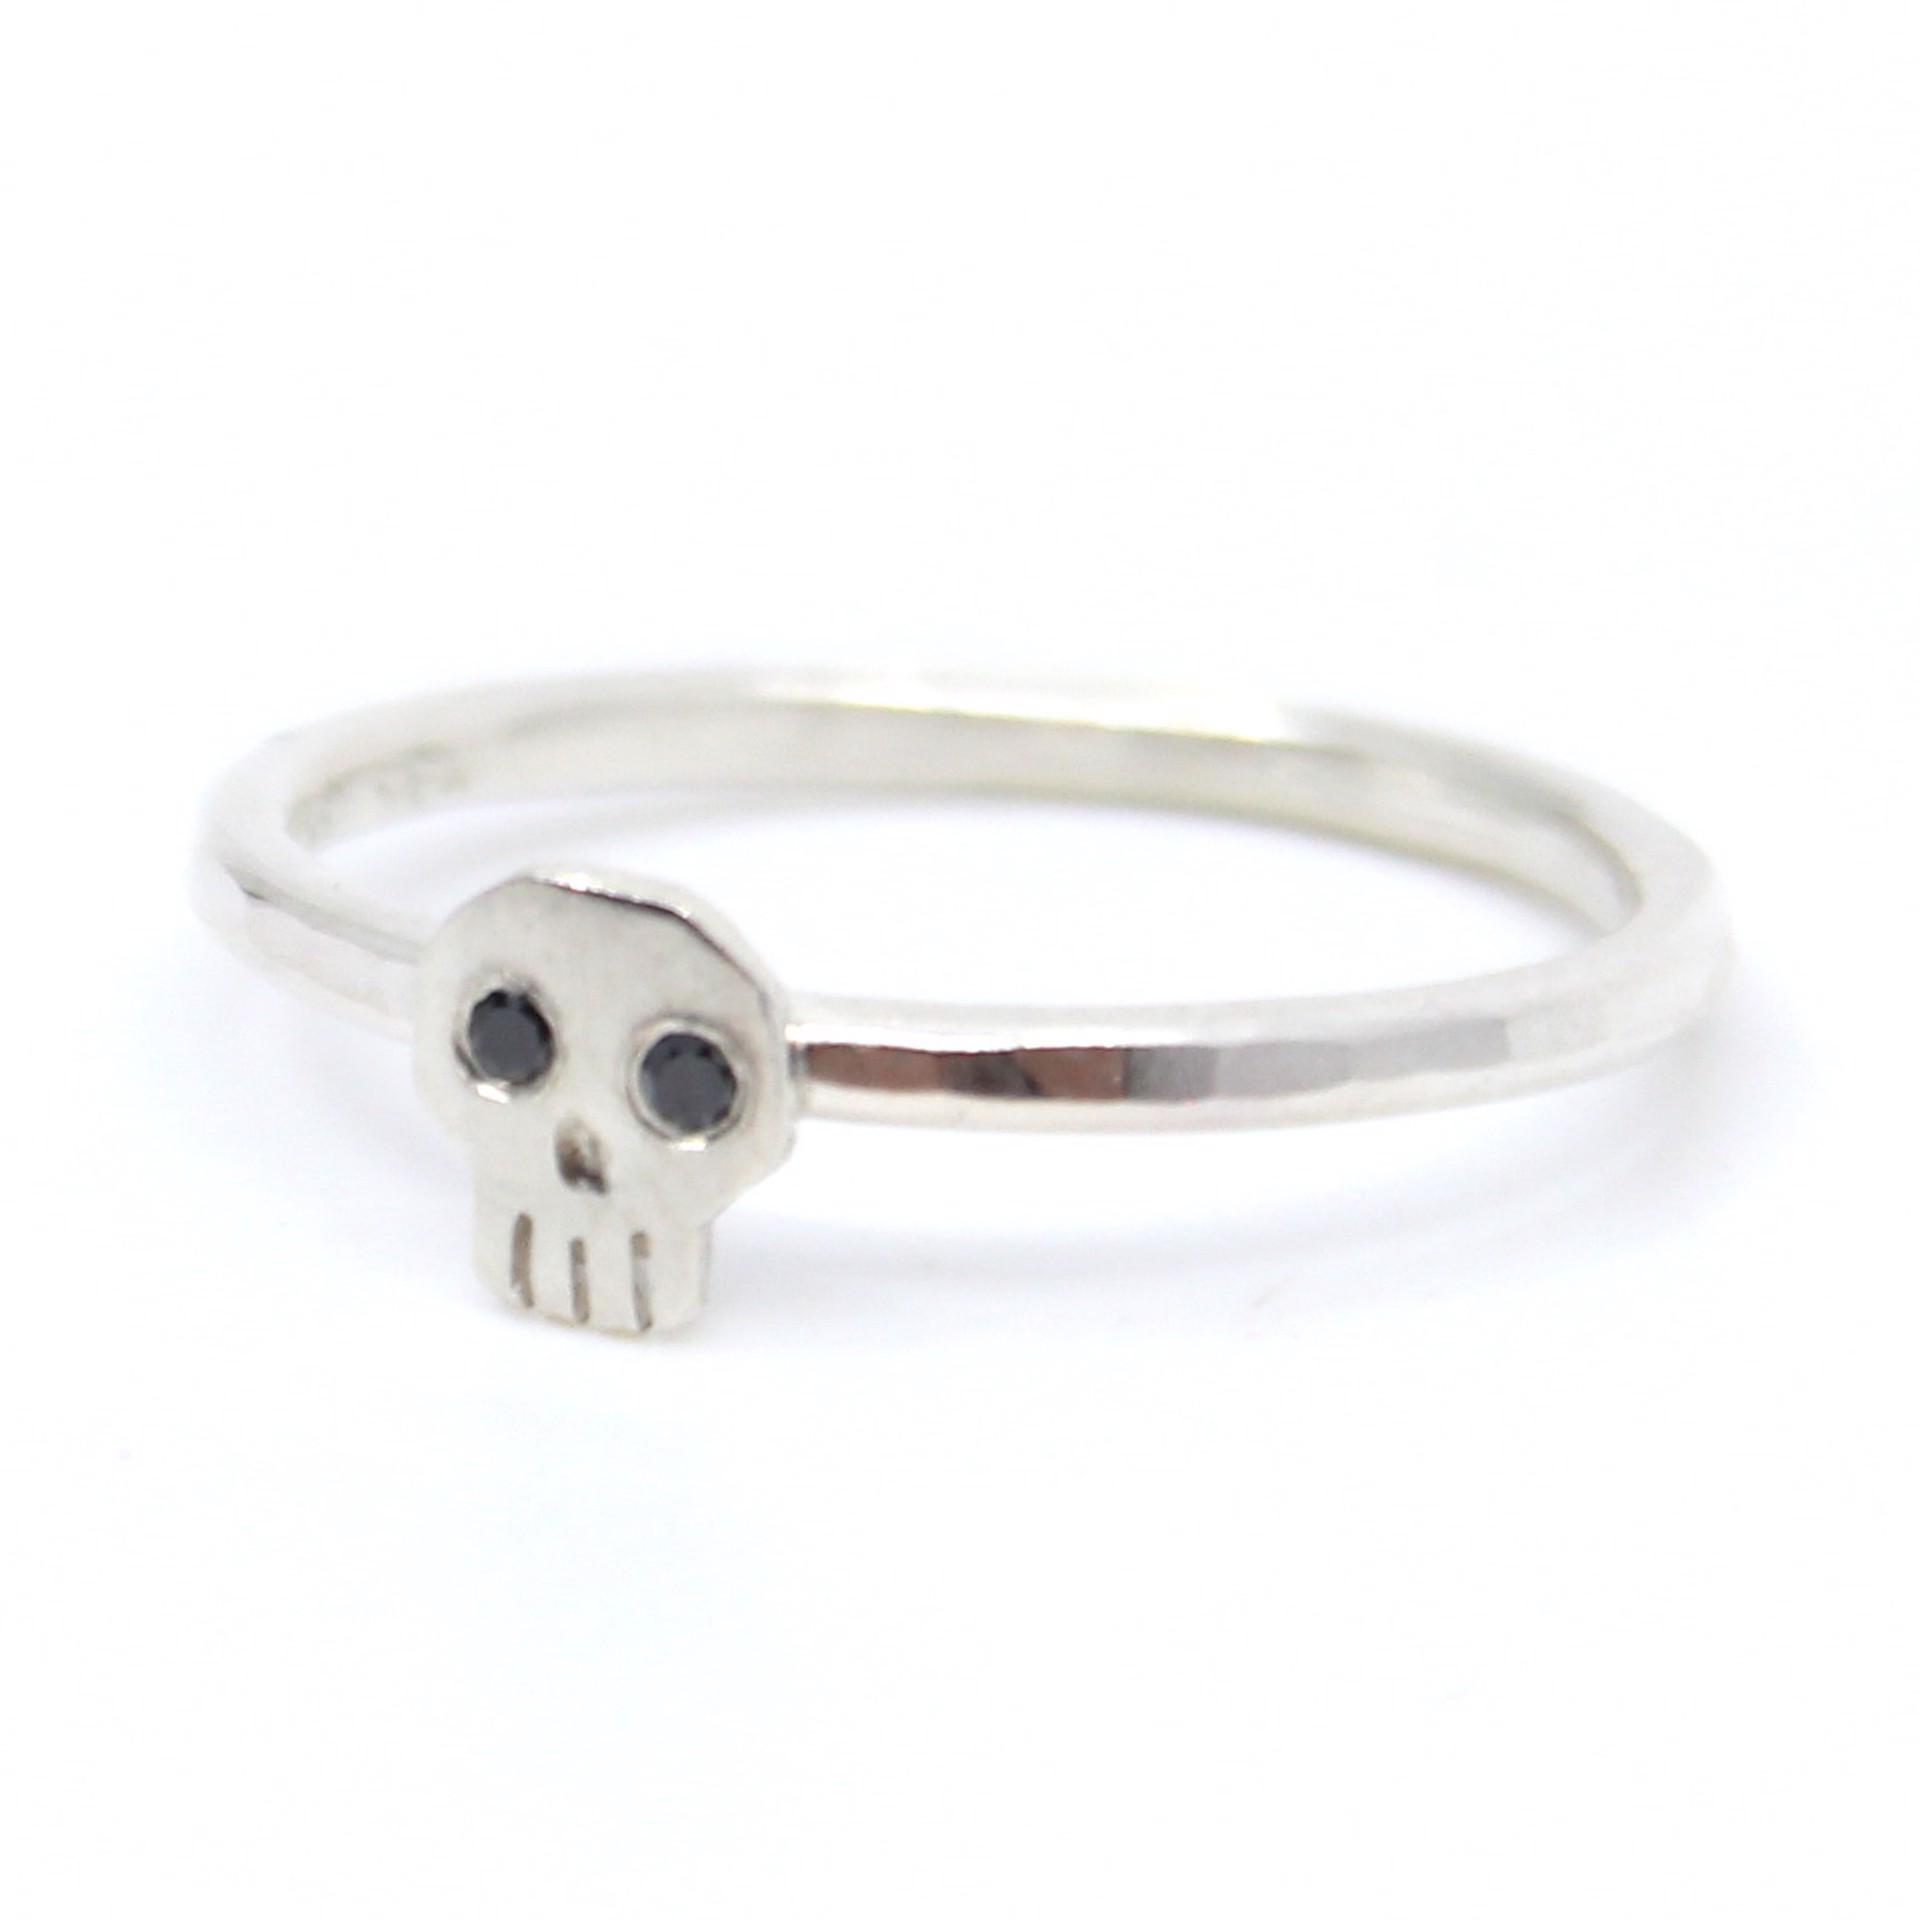 Single Skull Ring (size 7) by Susan Elnora